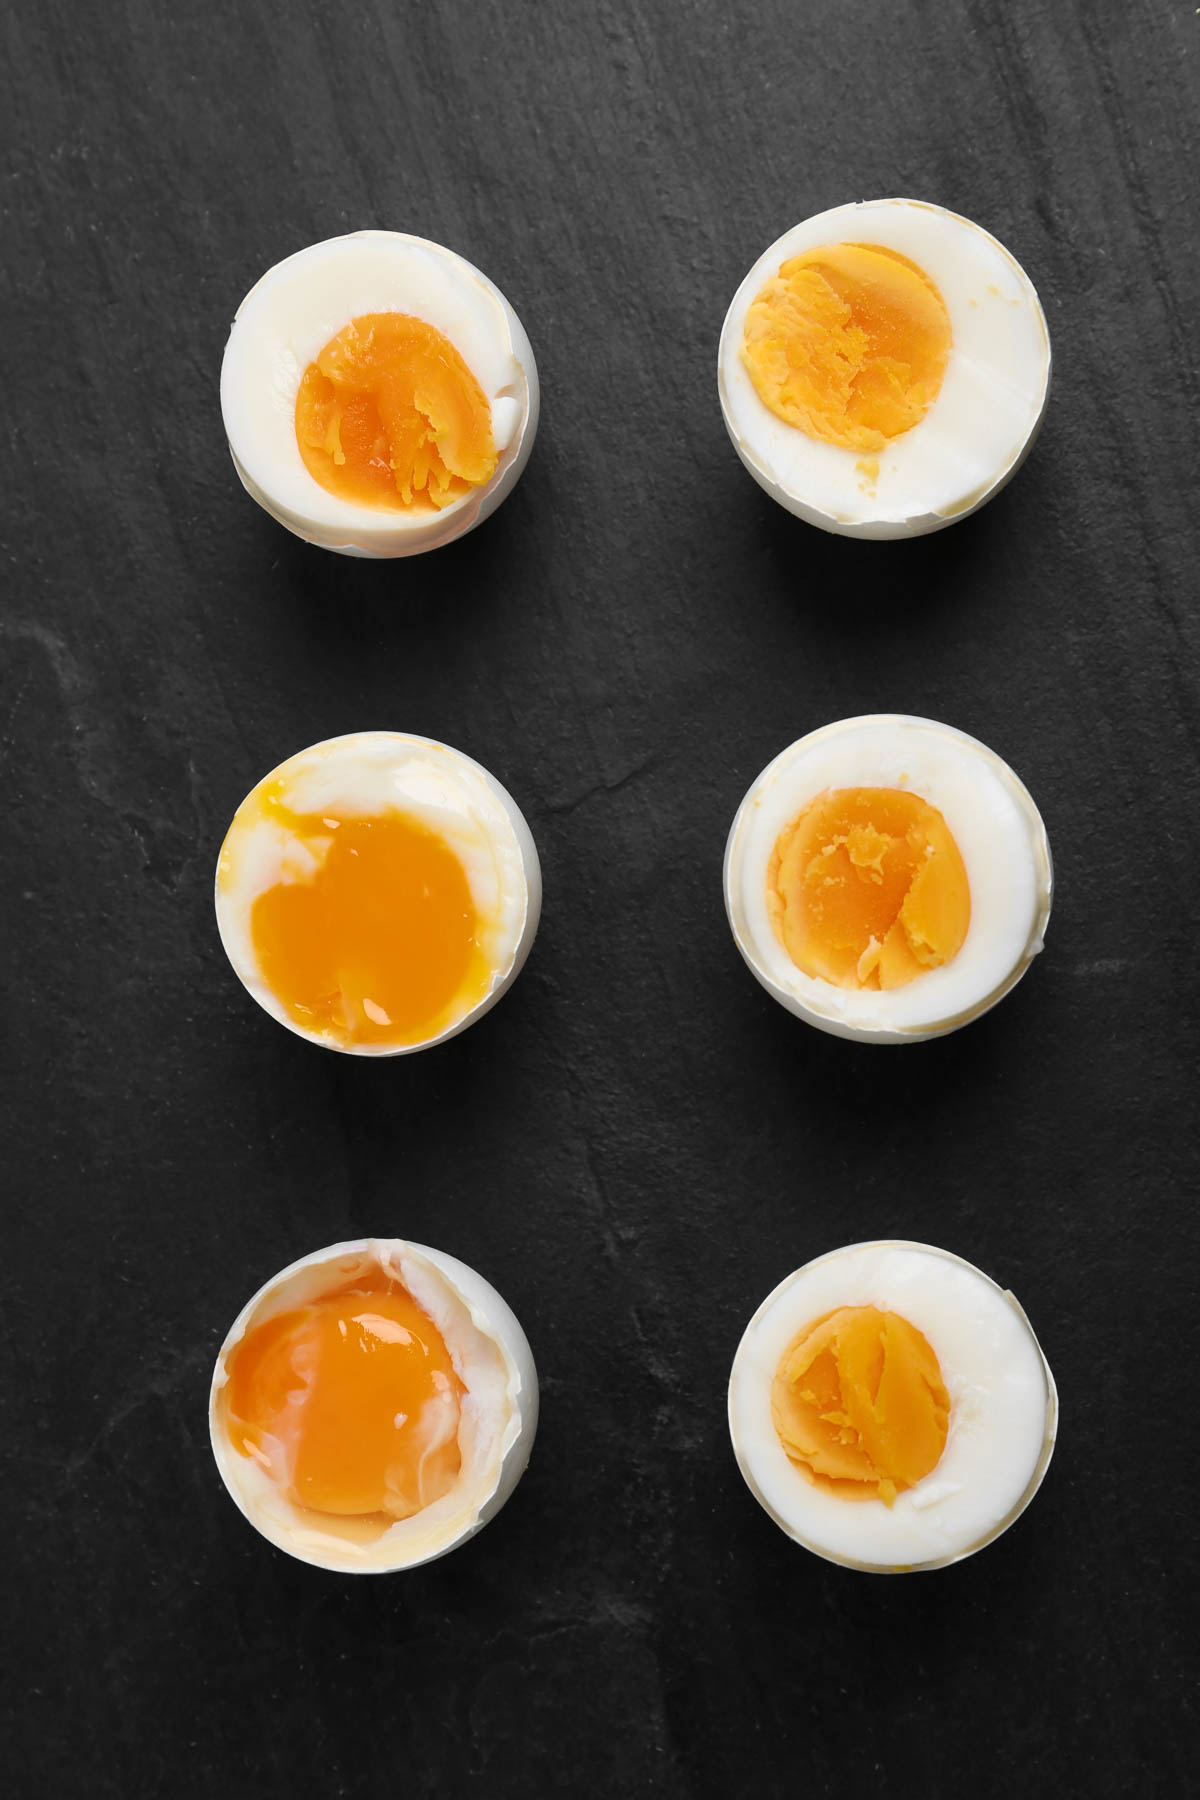 Perfectly boiled eggs at different doneness levels on a black background.